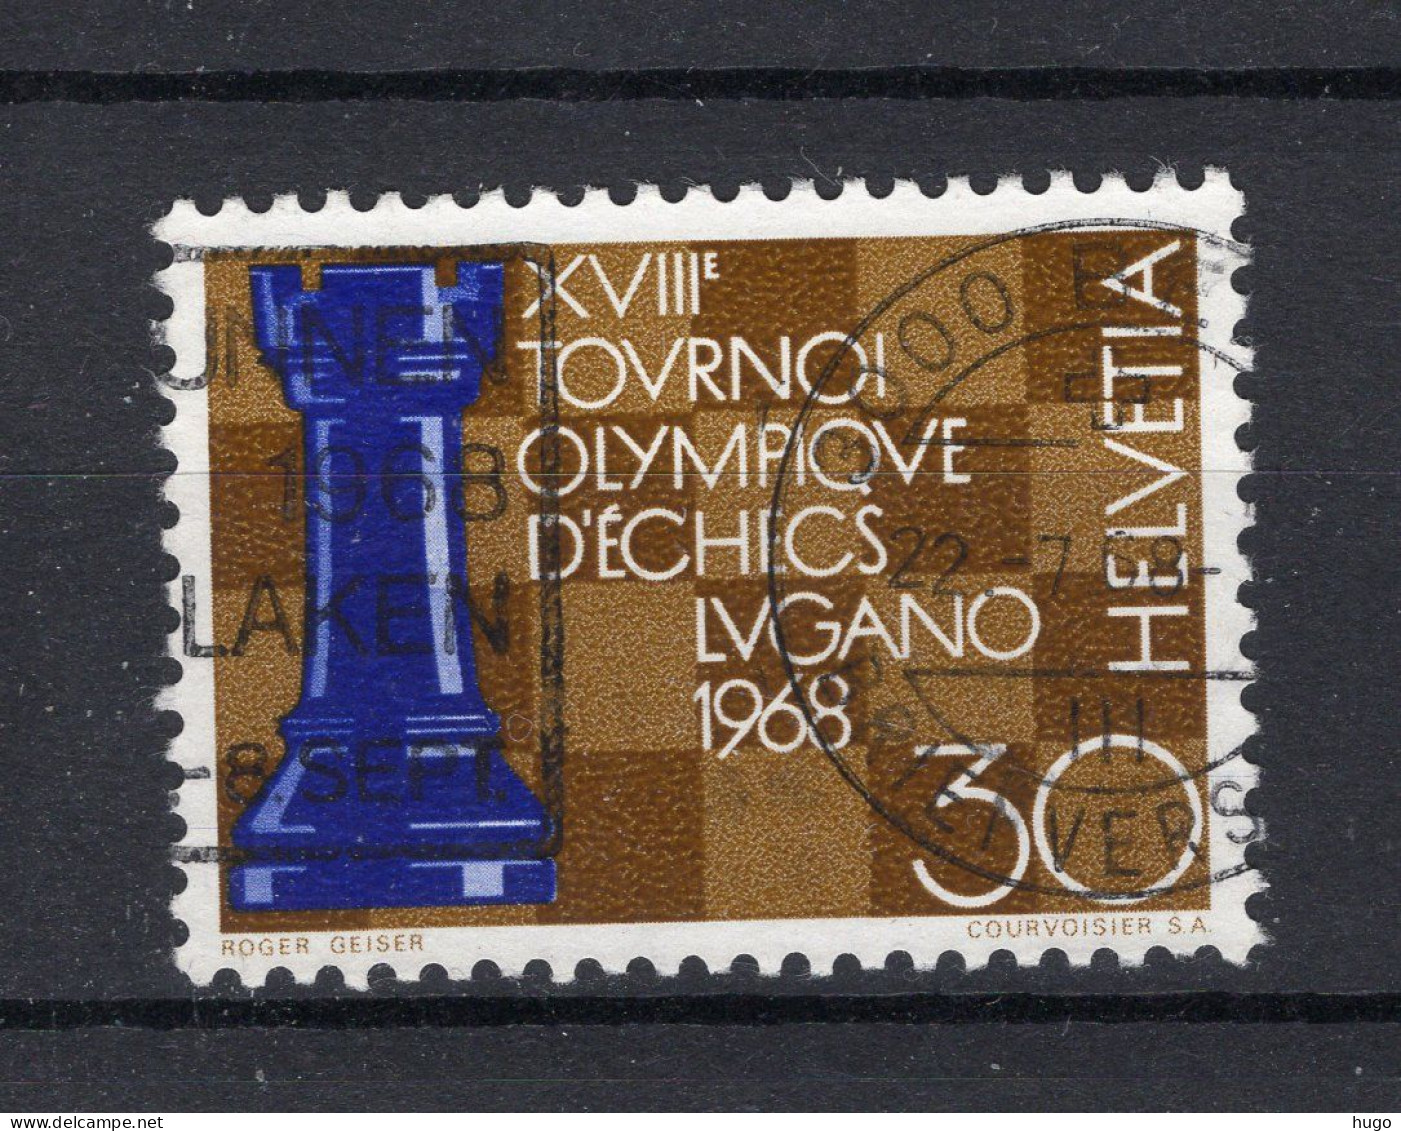 ZWITSERLAND Yt. 804° Gestempeld 1968 - Used Stamps